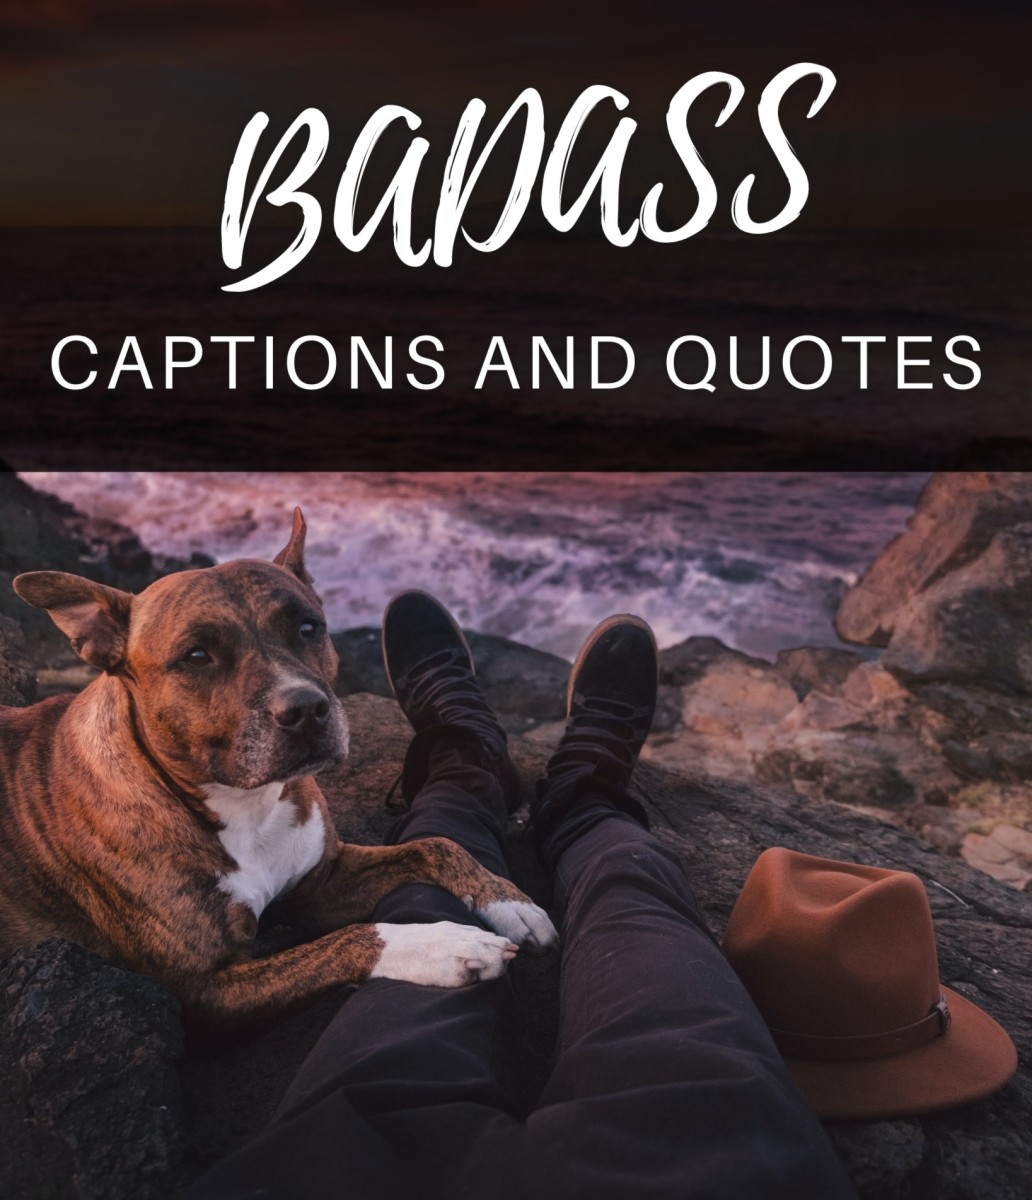 250+ Badass Quotes and Caption Ideas for Instagram